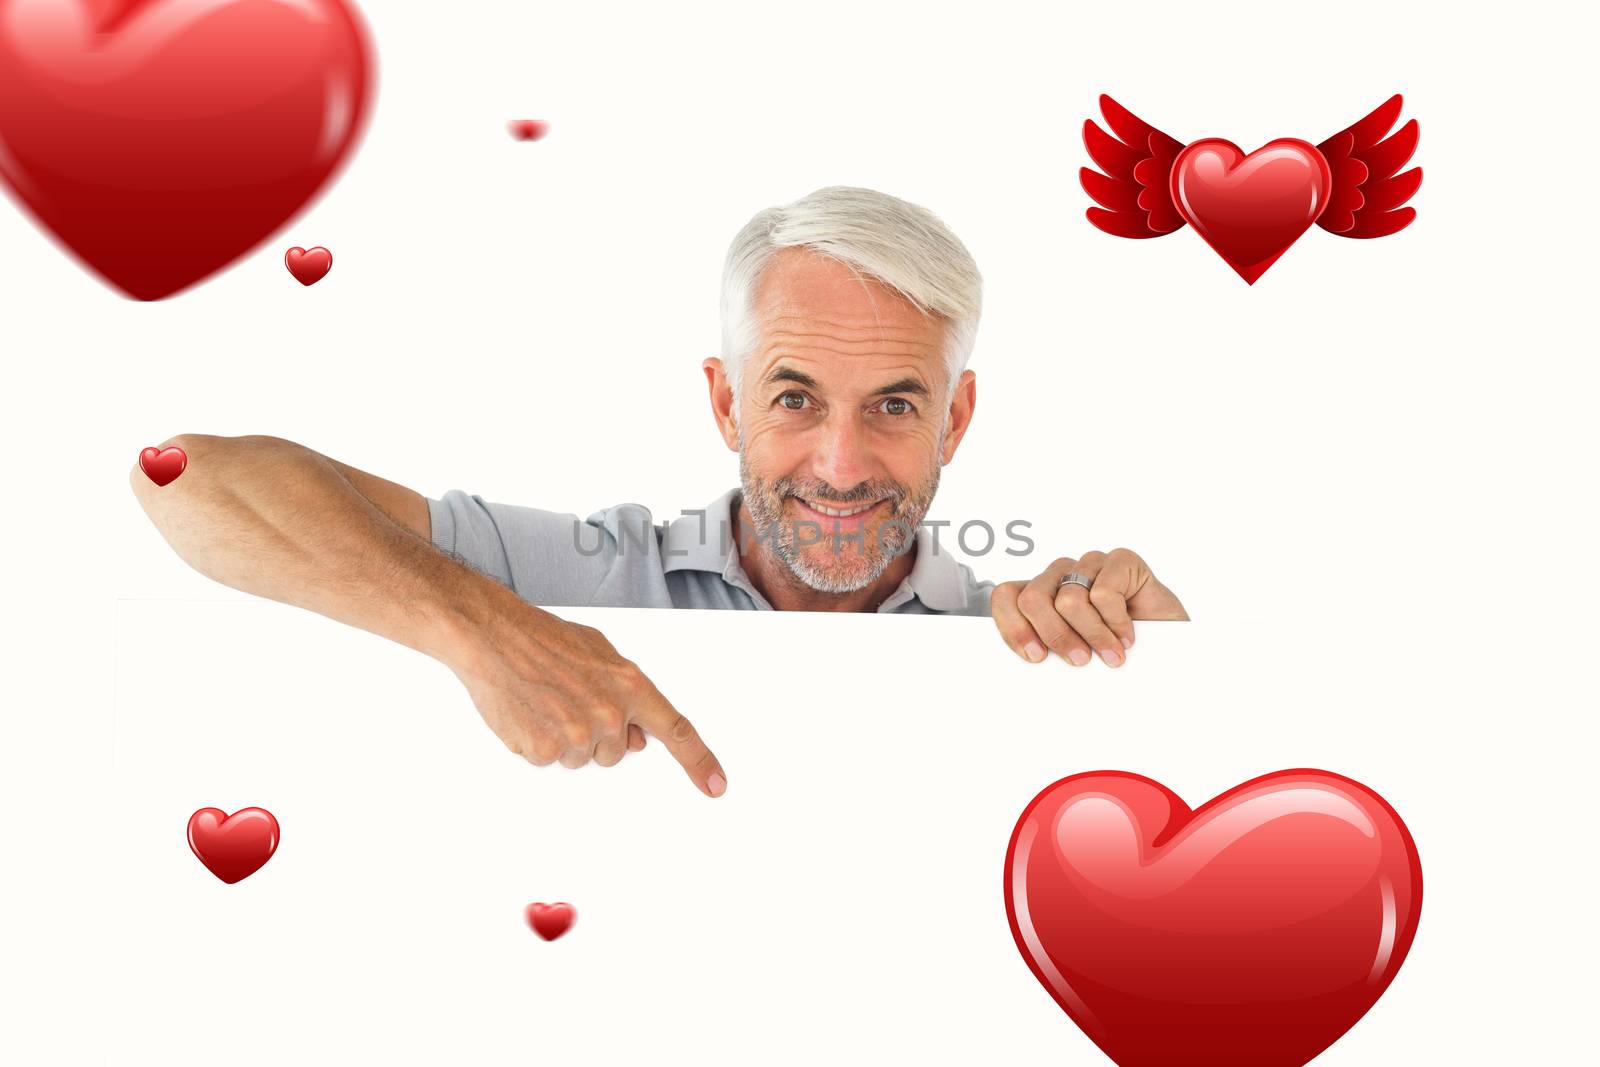 Smiling man showing large poster against hearts